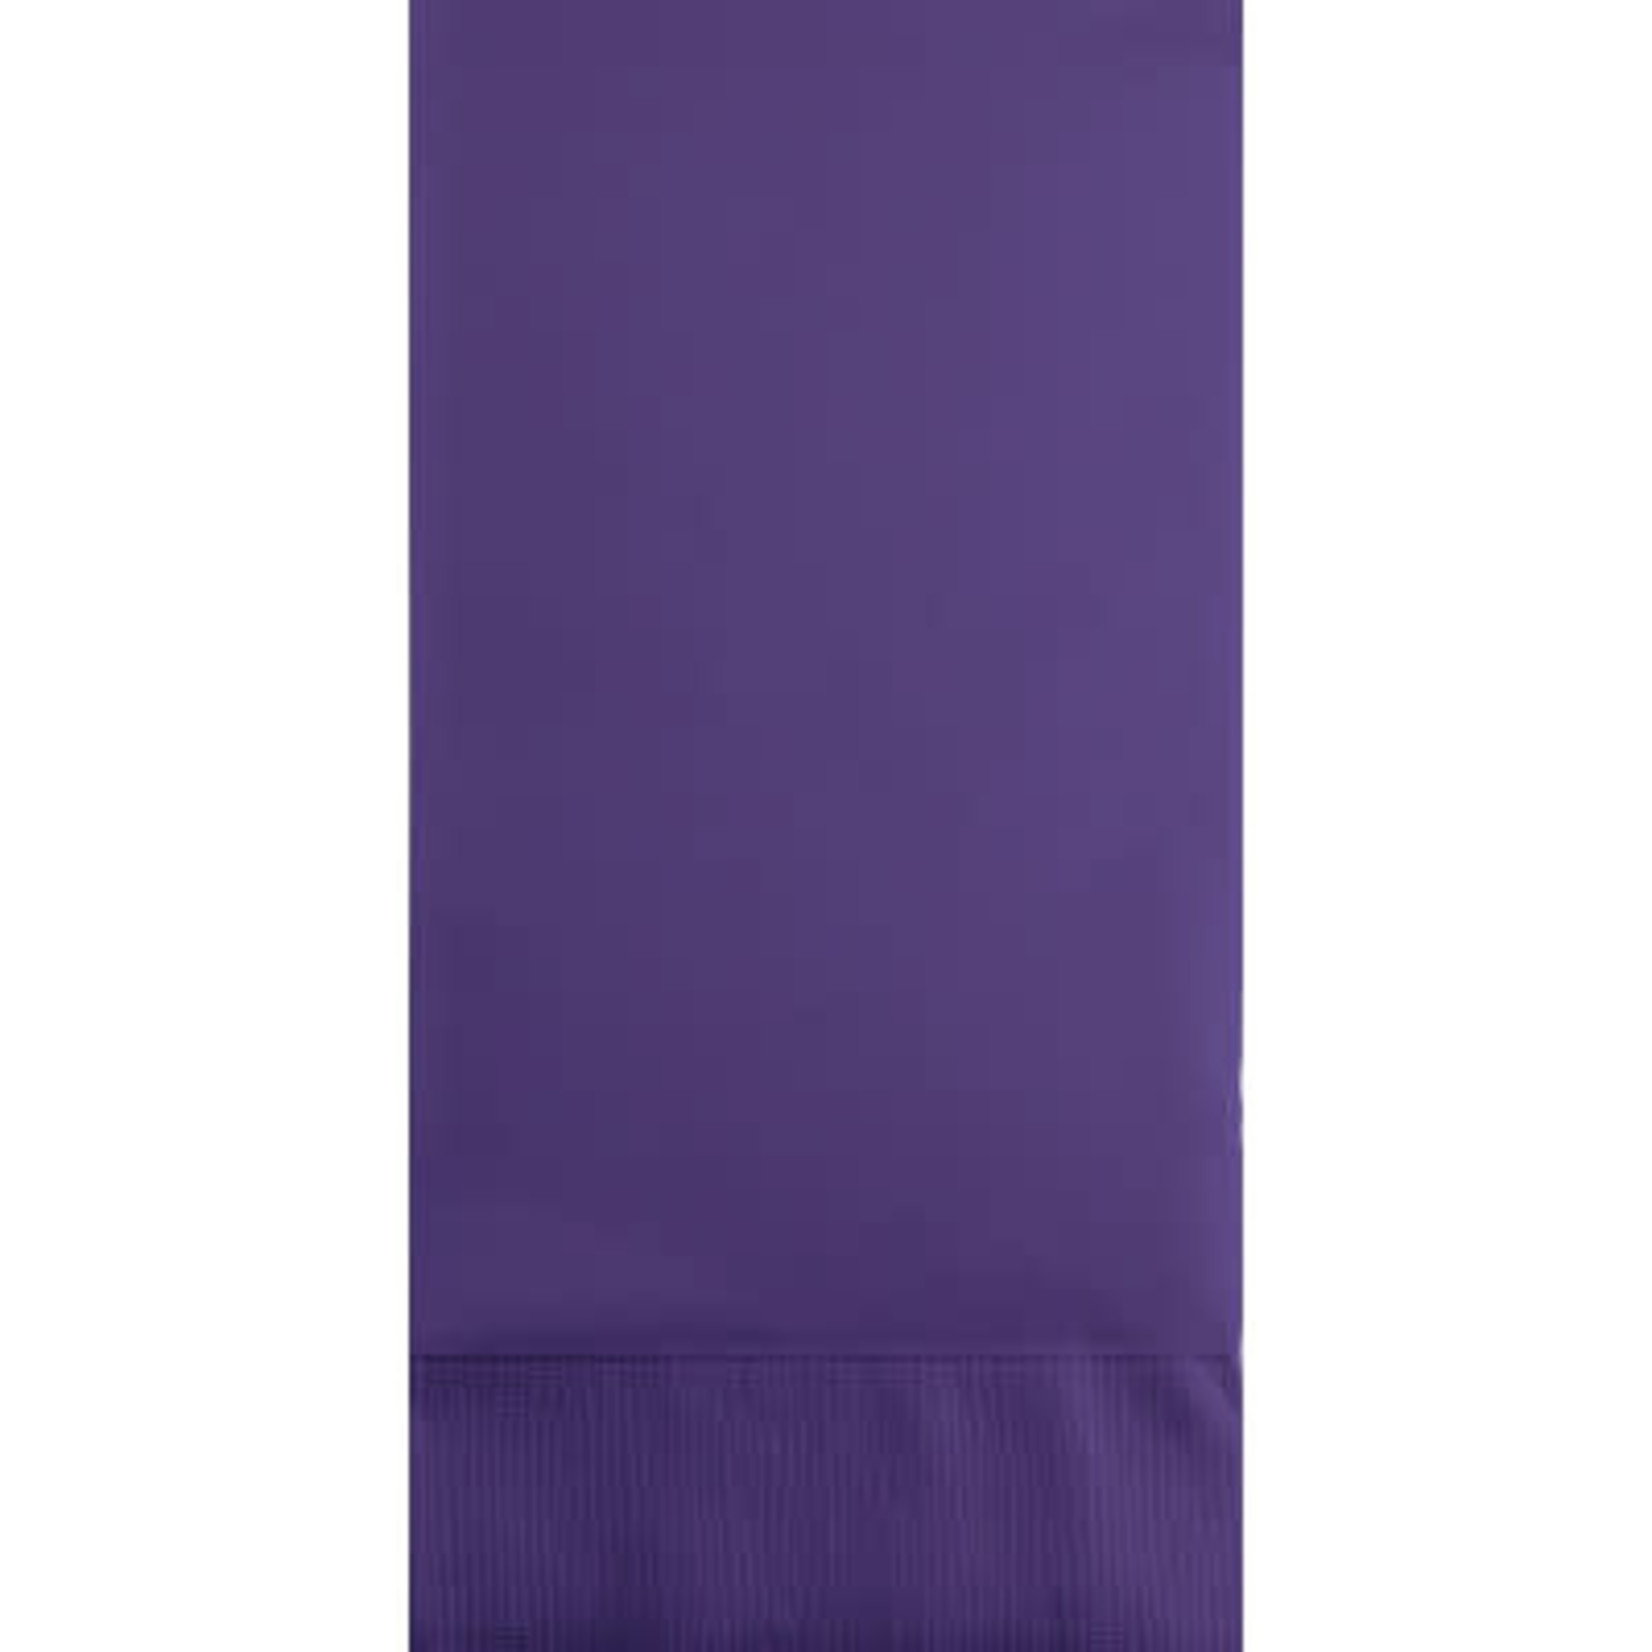 Touch of Color Purple 3-Ply Guest Towels - 16ct.